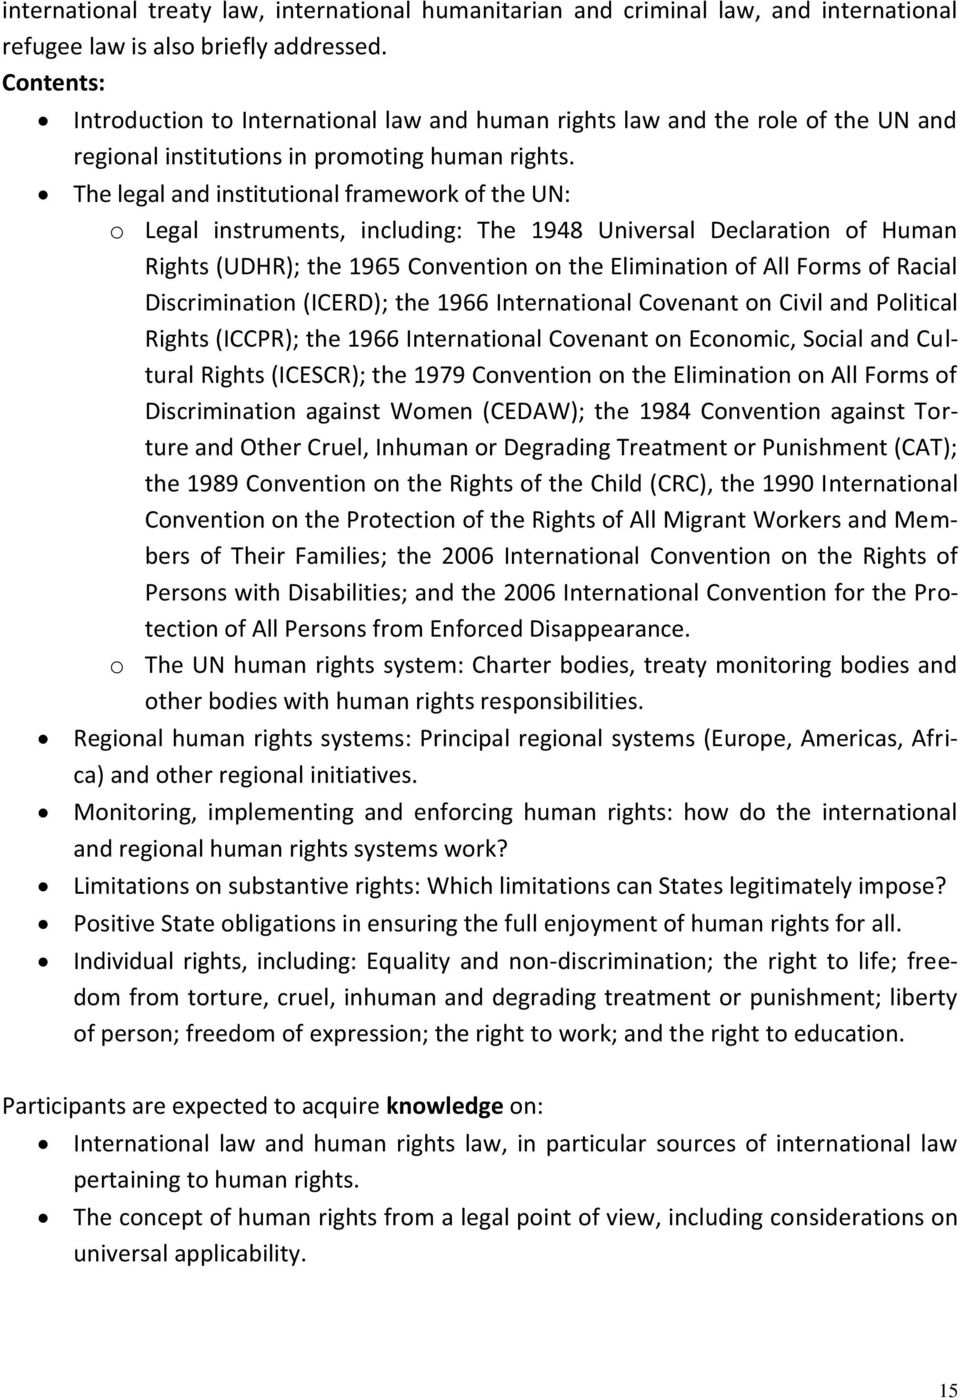 The legal and institutional framework of the UN: o Legal instruments, including: The 1948 Universal Declaration of Human Rights (UDHR); the 1965 Convention on the Elimination of All Forms of Racial